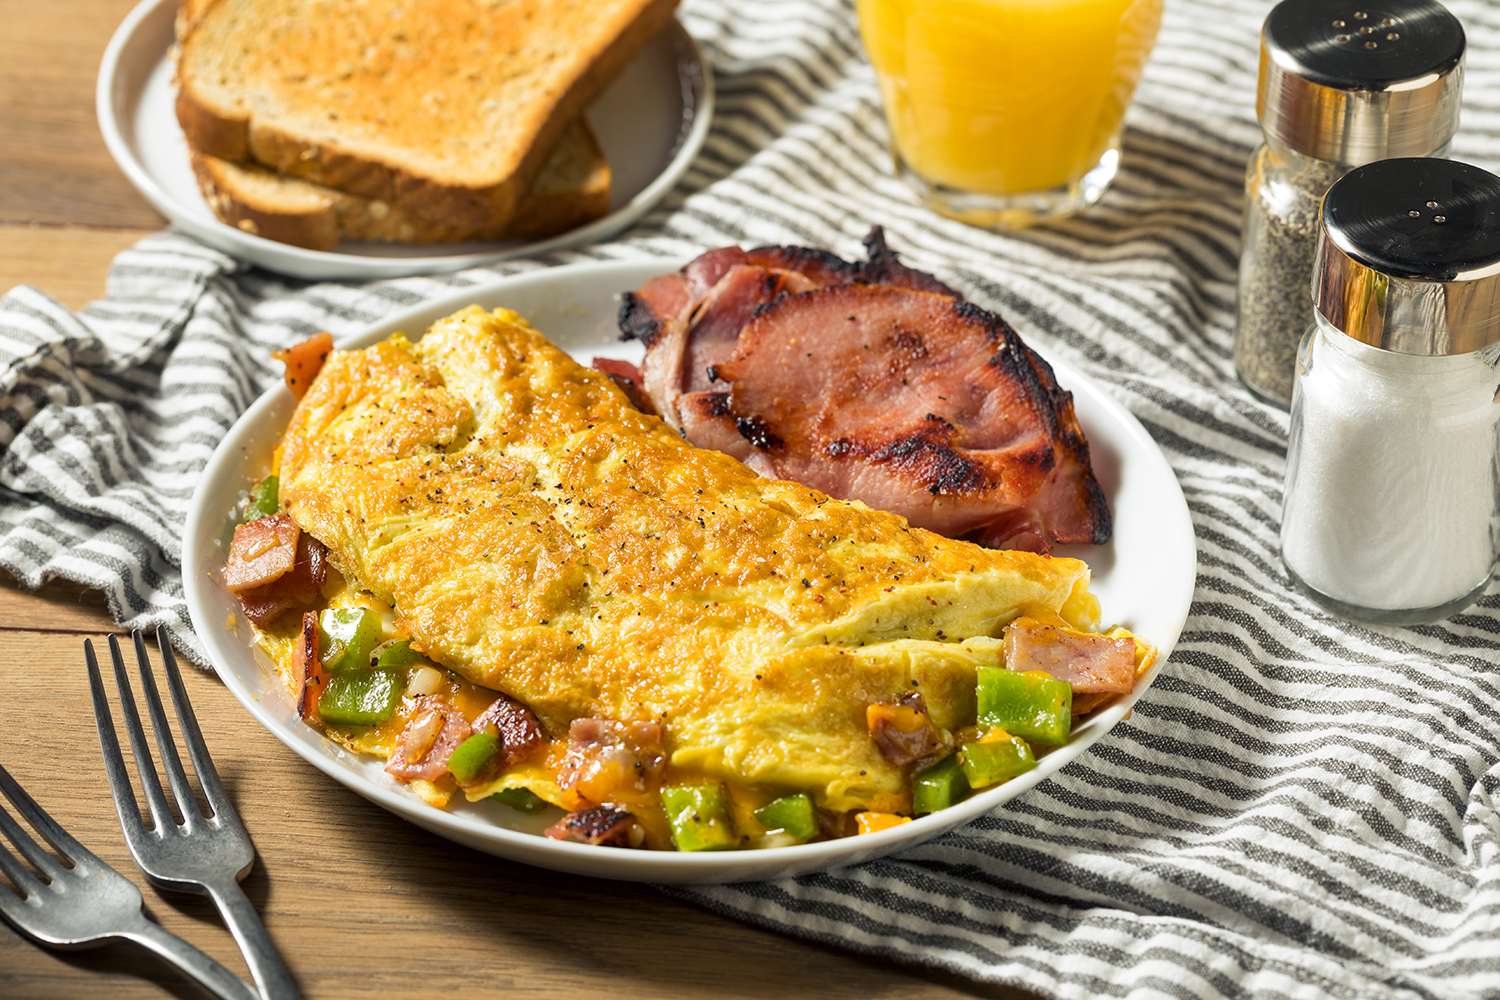 https://www.themanual.com/wp-content/uploads/sites/9/2021/08/homemade-omelette-on-plate.jpg?fit=1500%2C1000&p=1